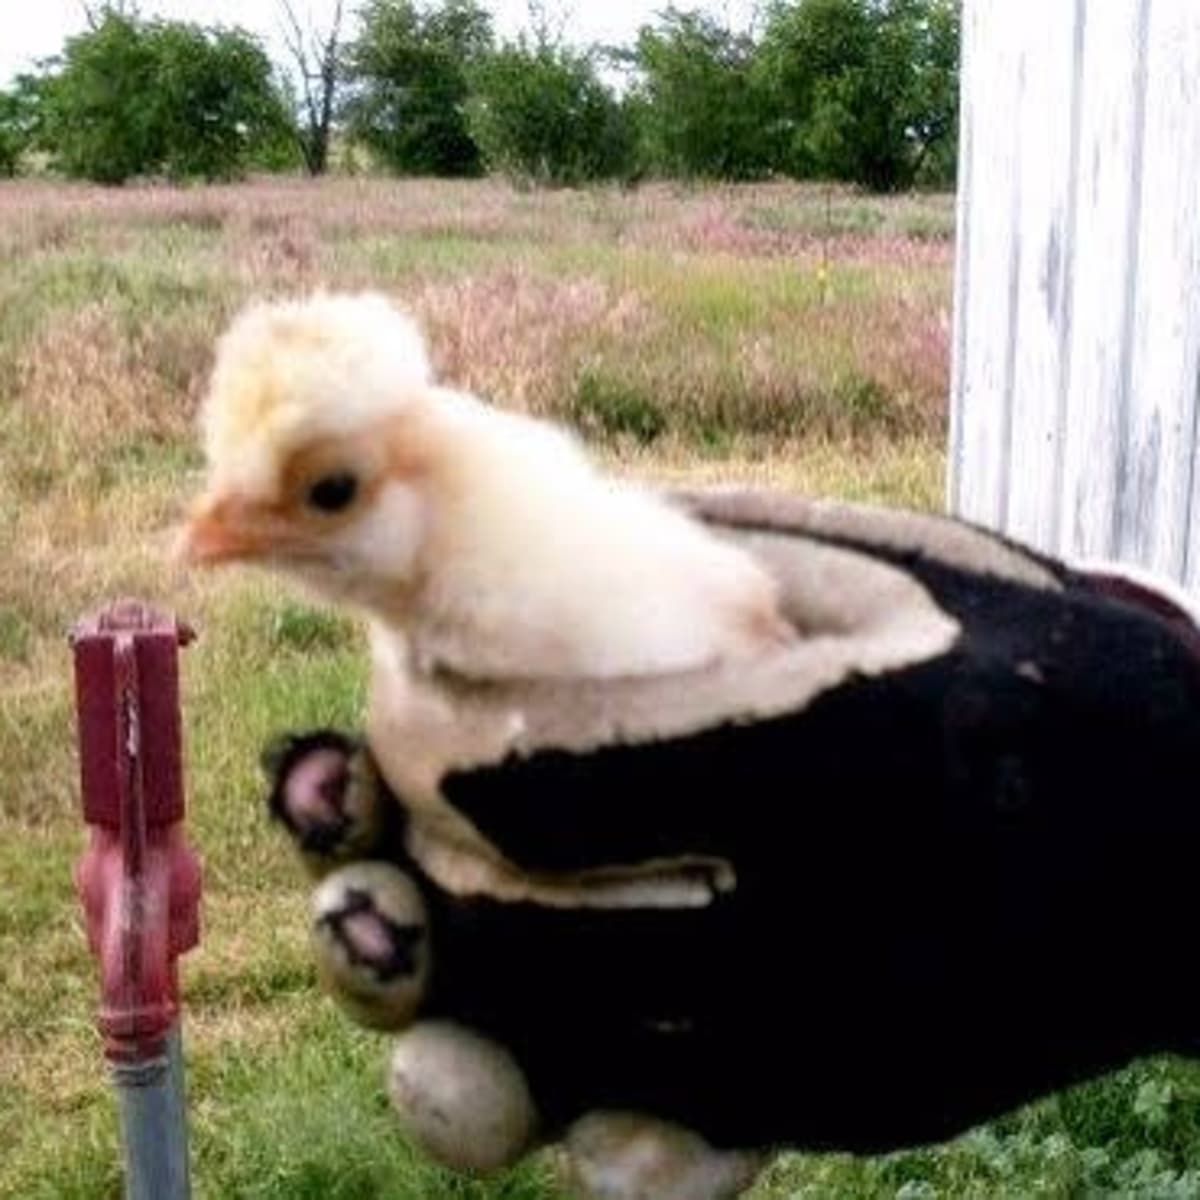 Photo Essay of Chicken Growth: From Hatching to Adulthood - PetHelpful